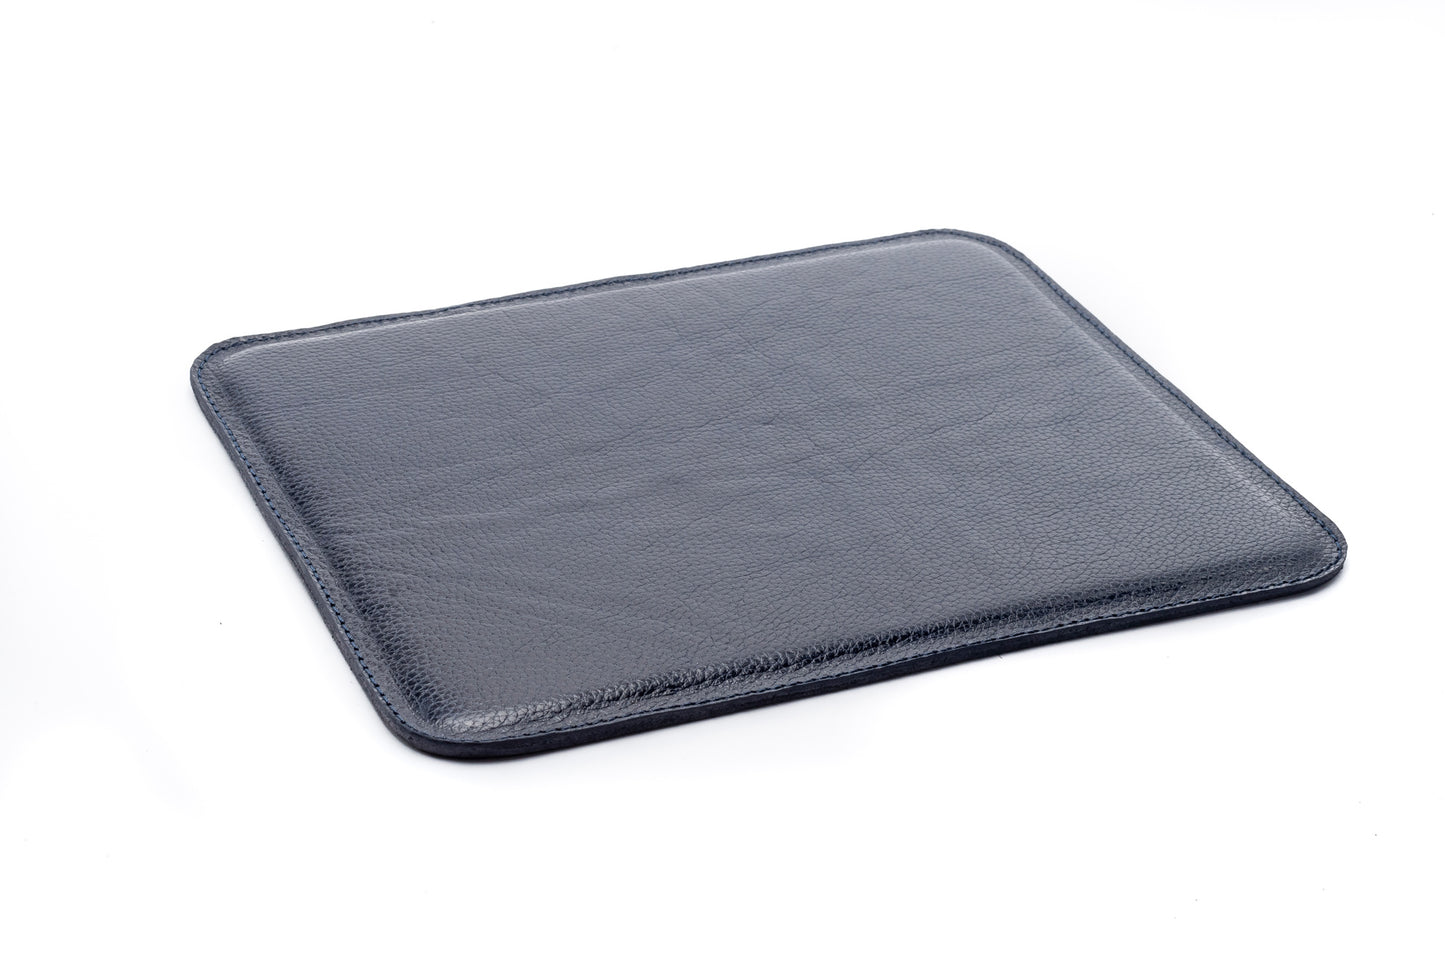 Leather Mouse Pad (Candor Full Grain)